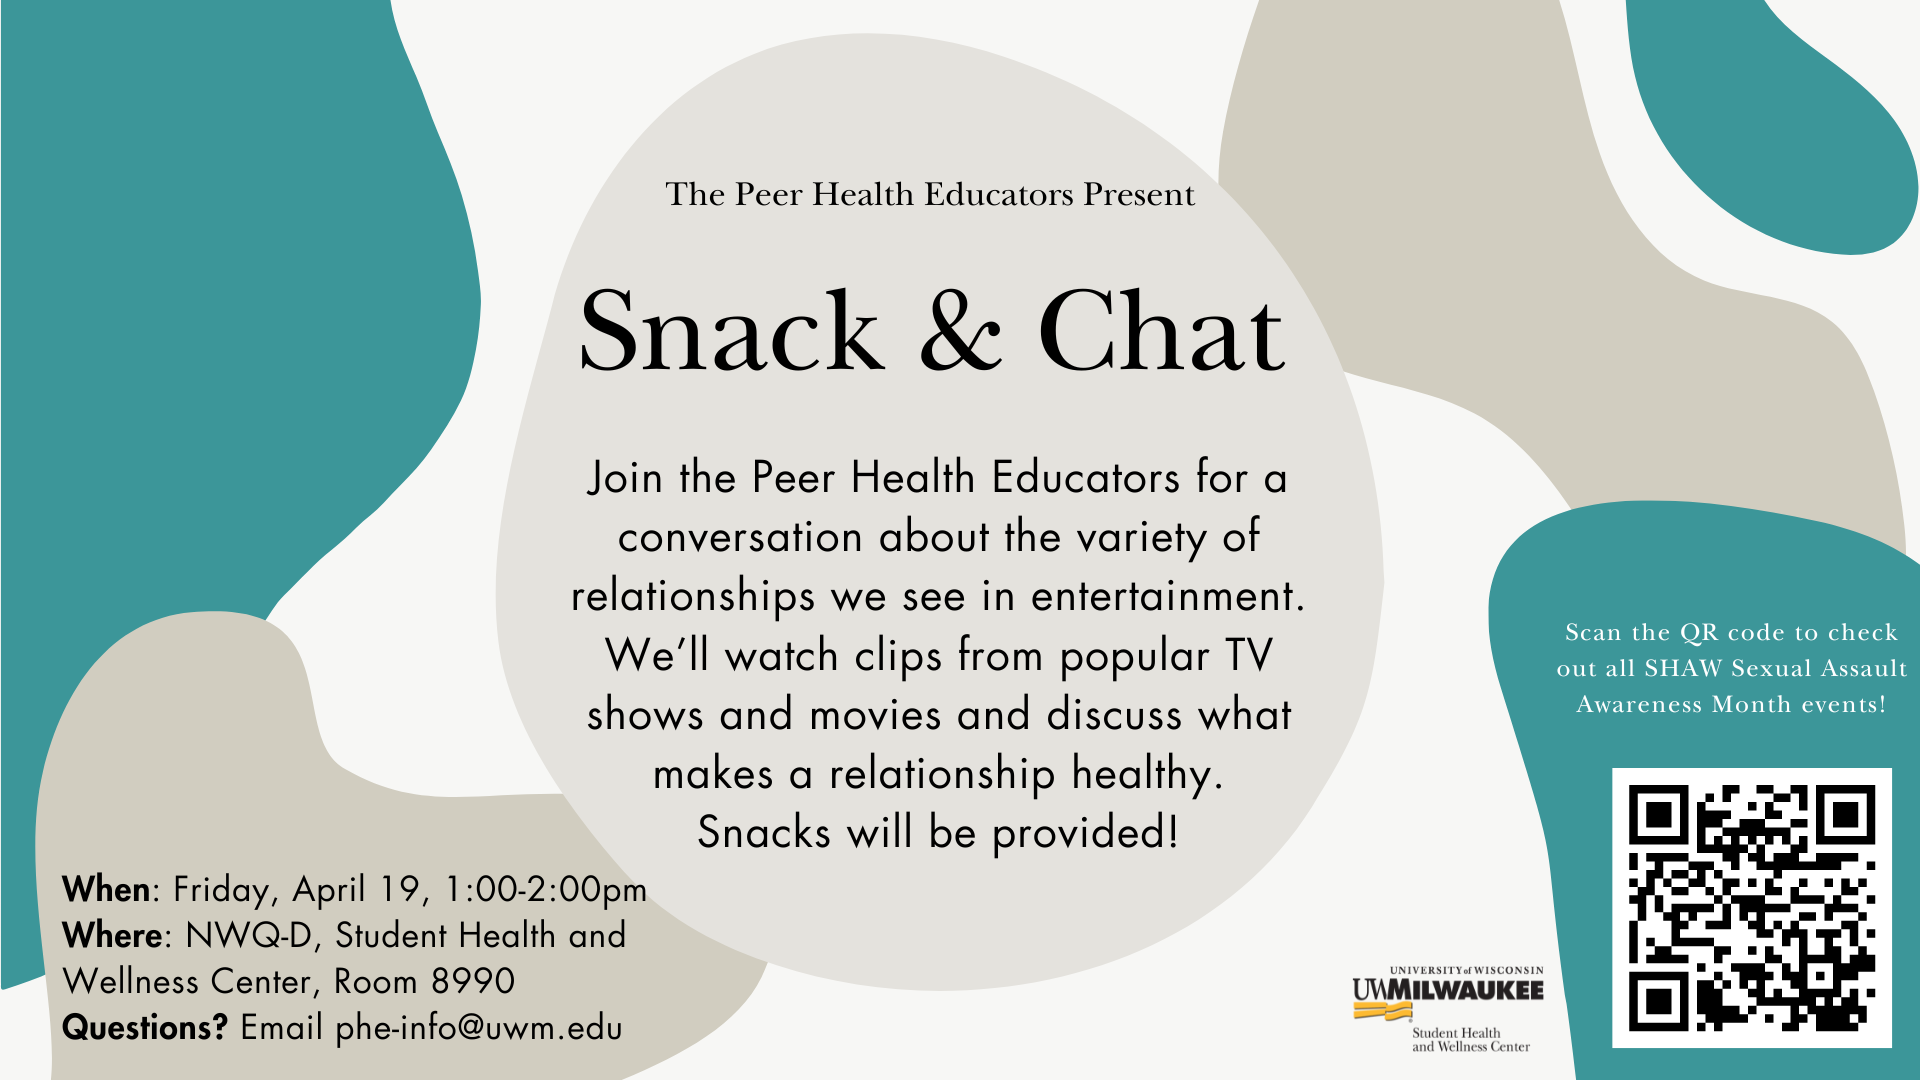 A teal and gray graphic with bubbles depicting an event where peer health educators have snacks and chat about famous movie scenes and tv shows that feature healthy relationships